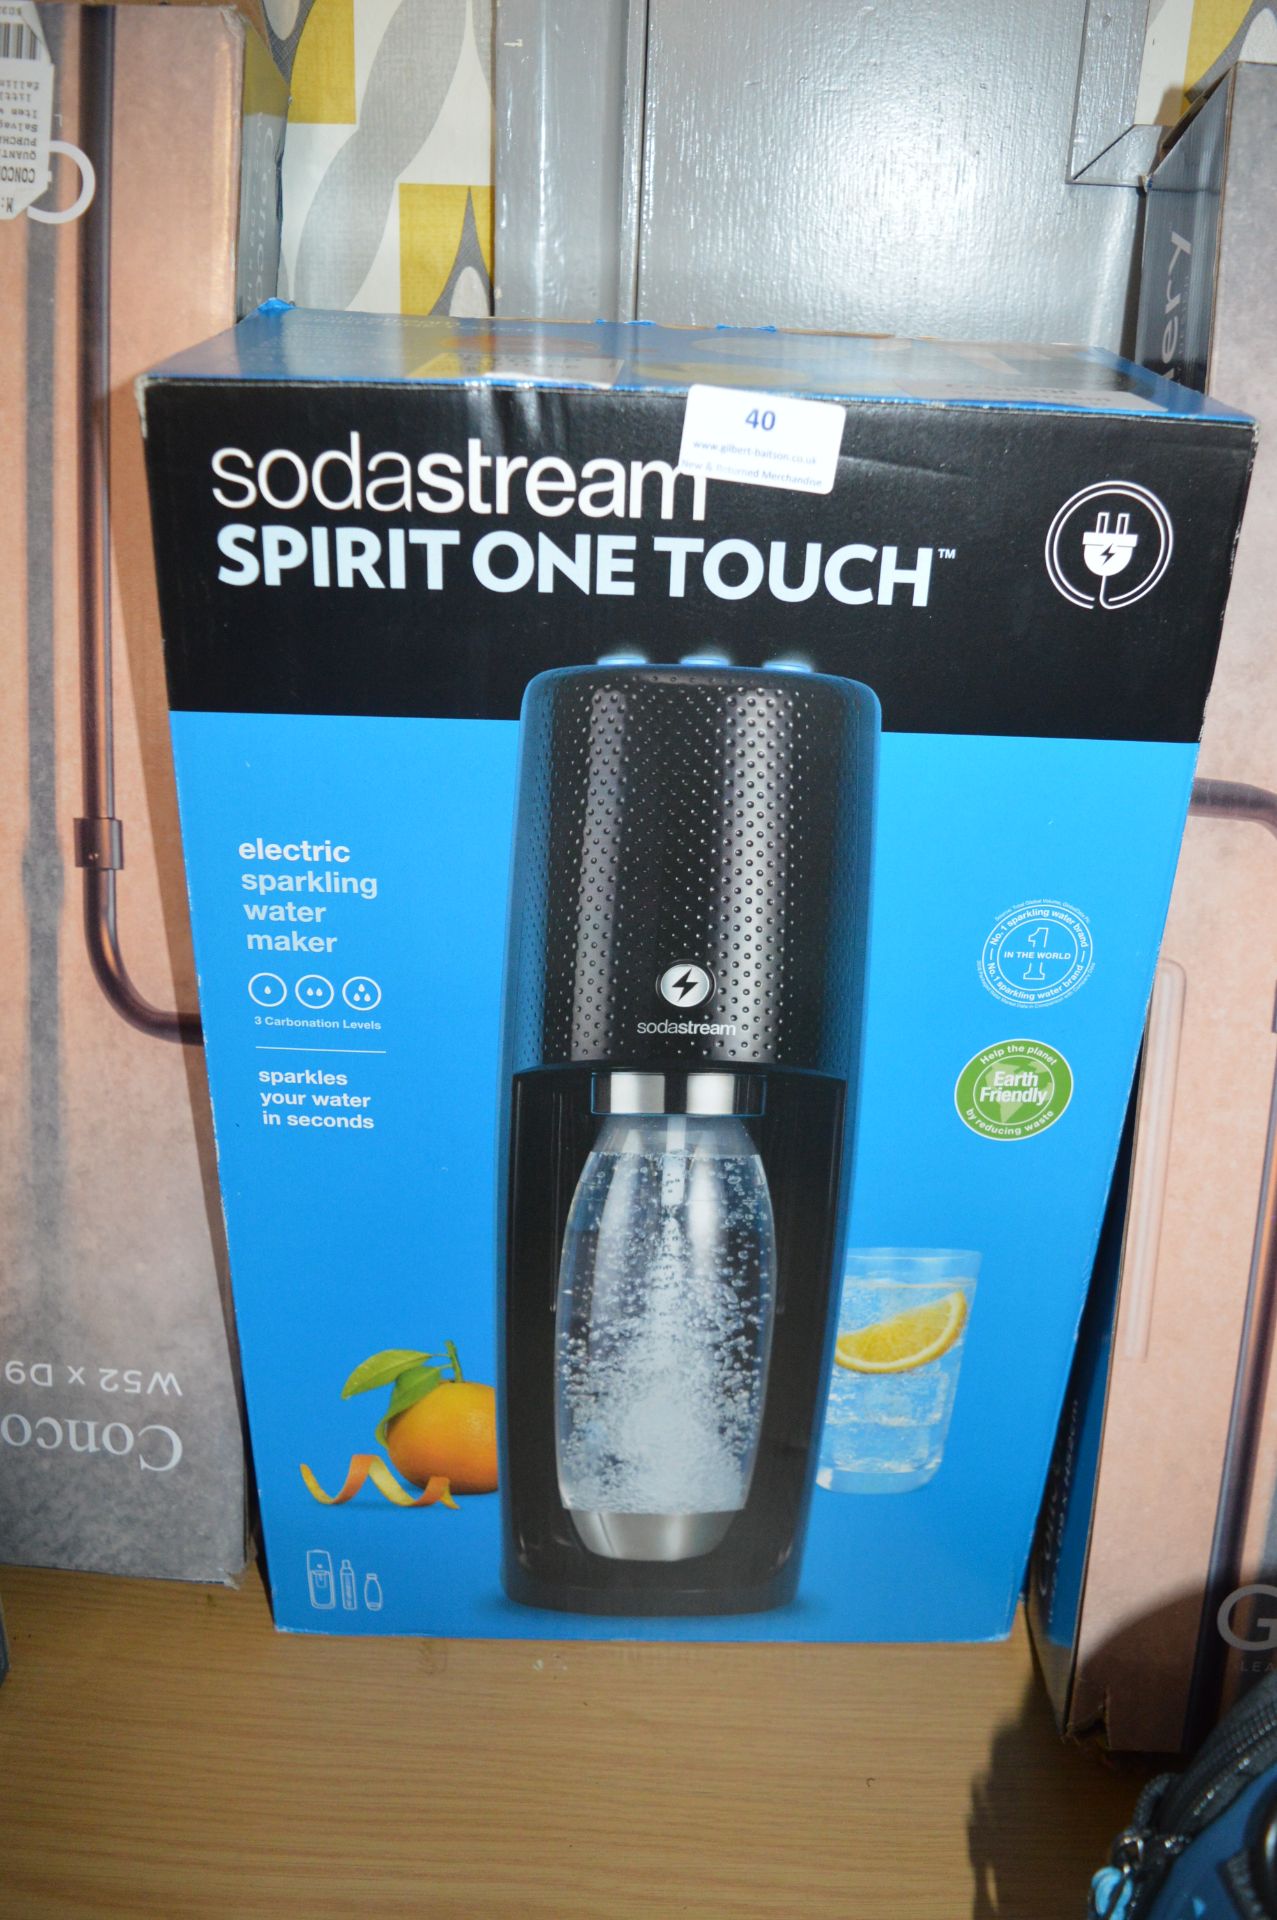 *Sodastream One Touch Sparkling Water Maker